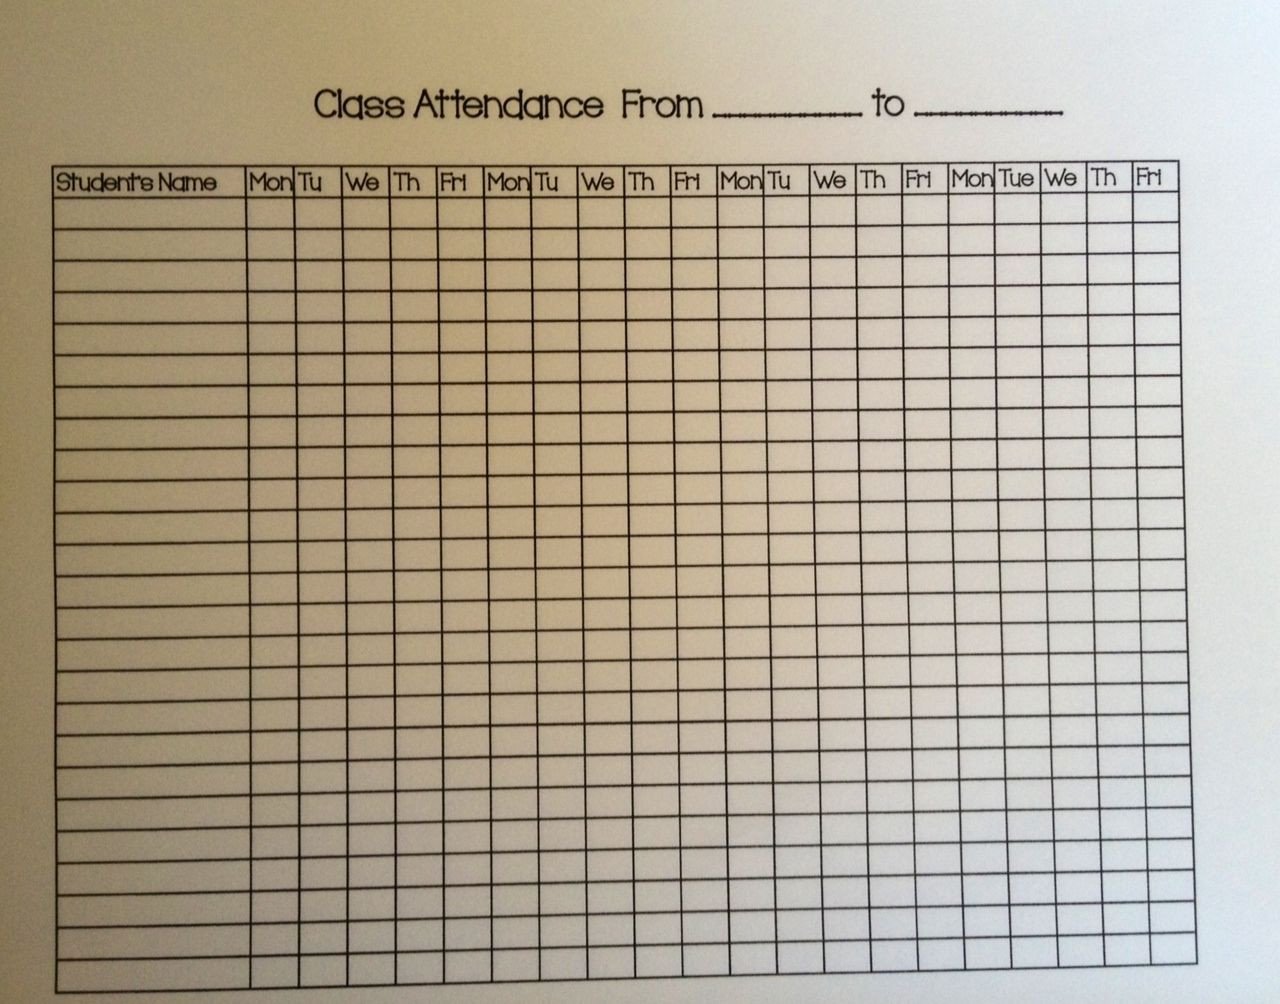 This is just a simple attendance sheet for you to keep